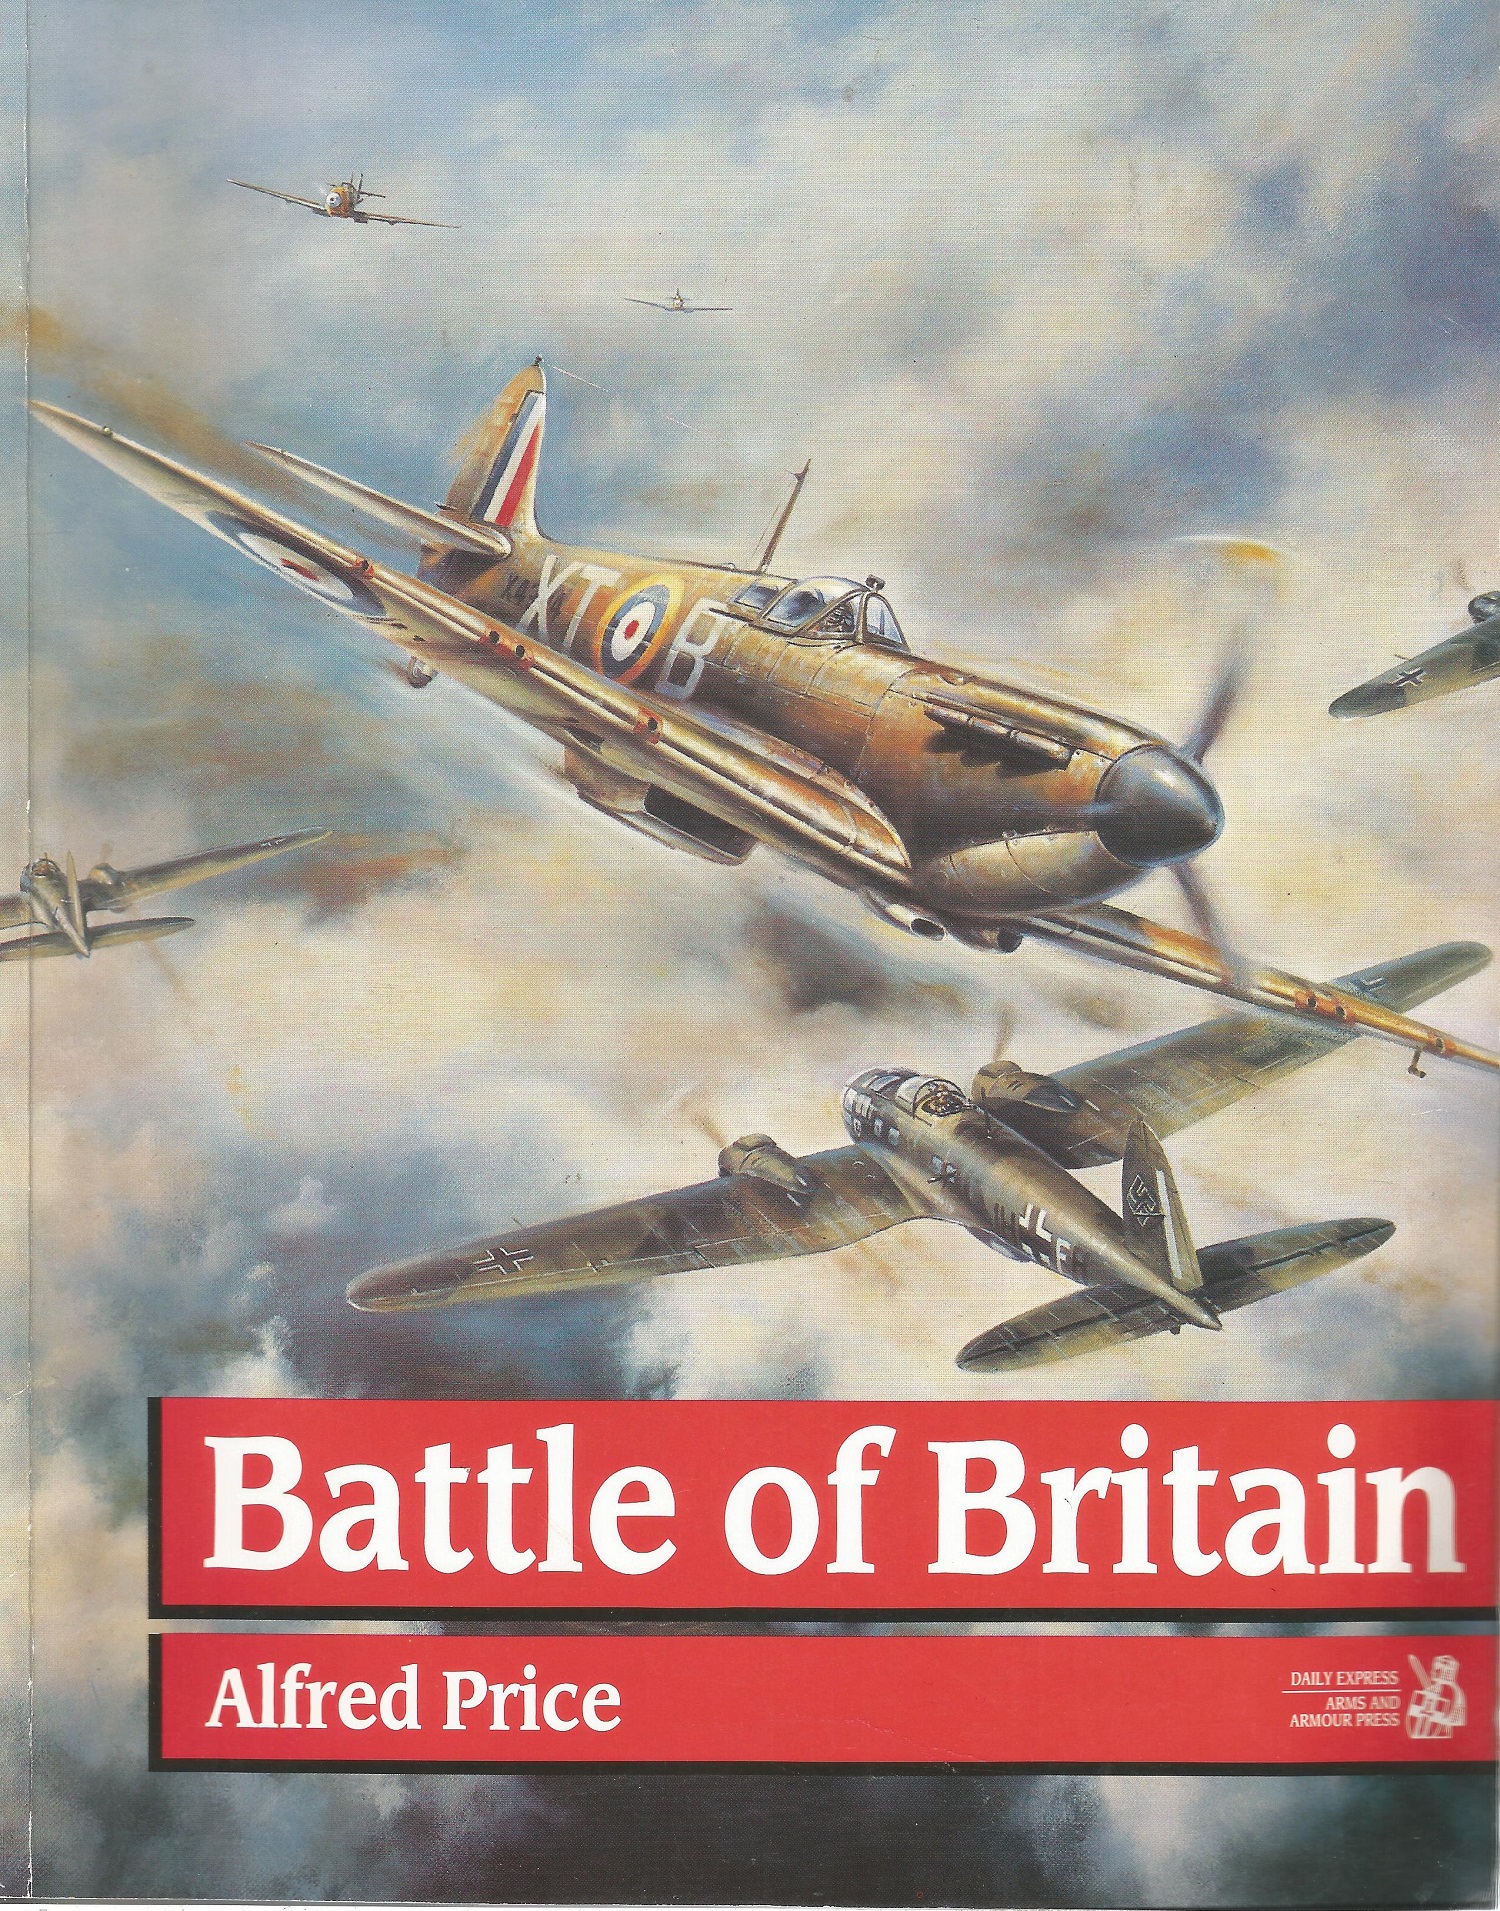 Battle of Britain paperback book by Alfred Price fantastic book accounting the events of the